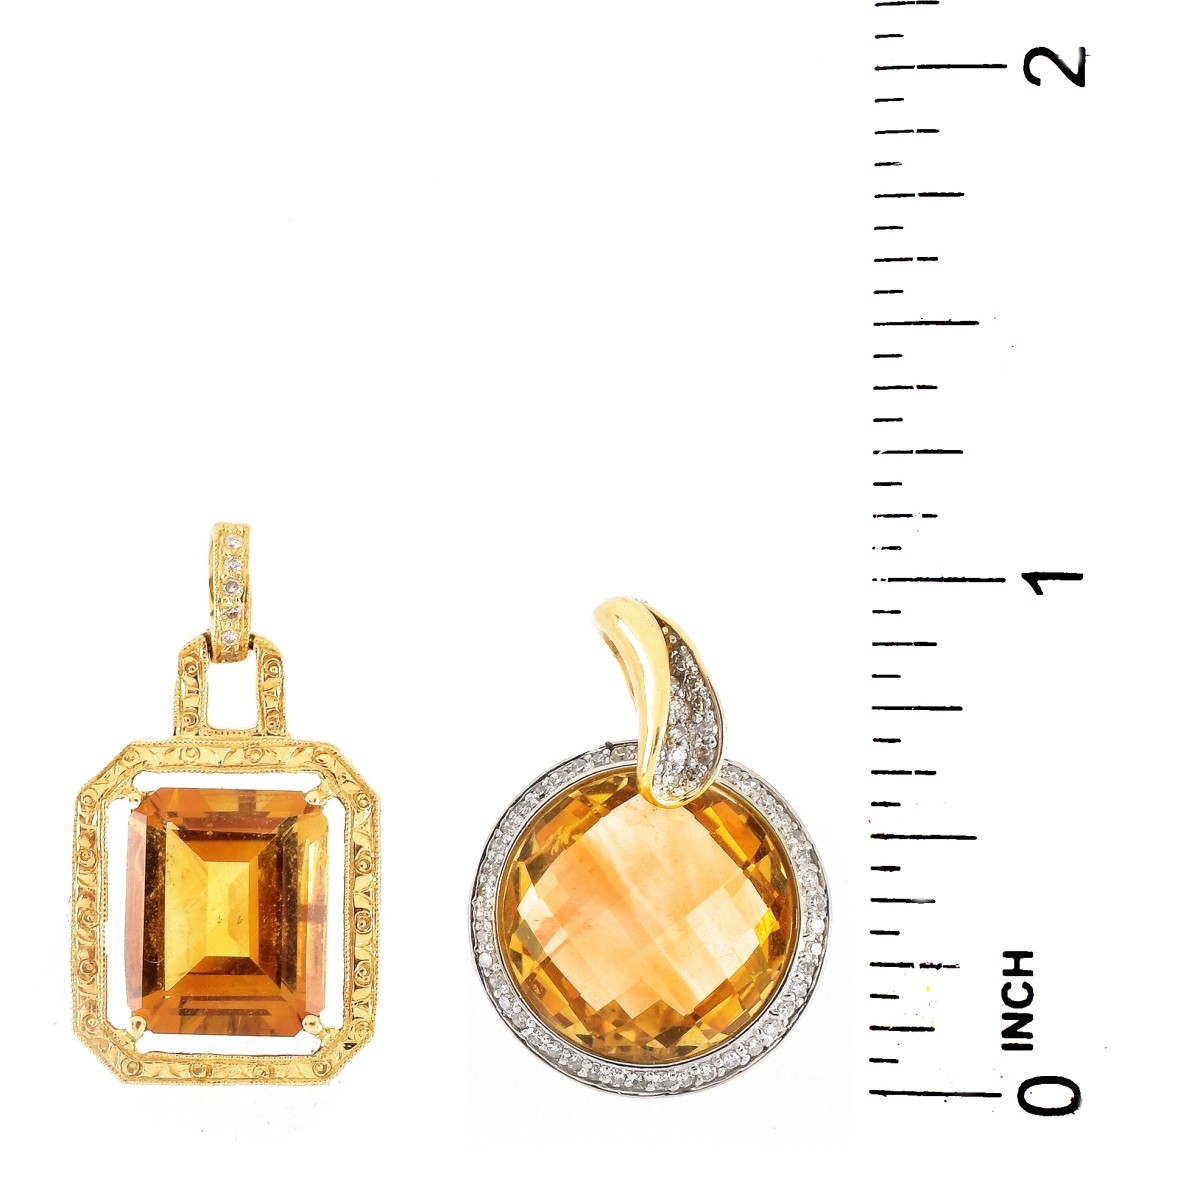 Two Citrine and 14K Gold Pendants